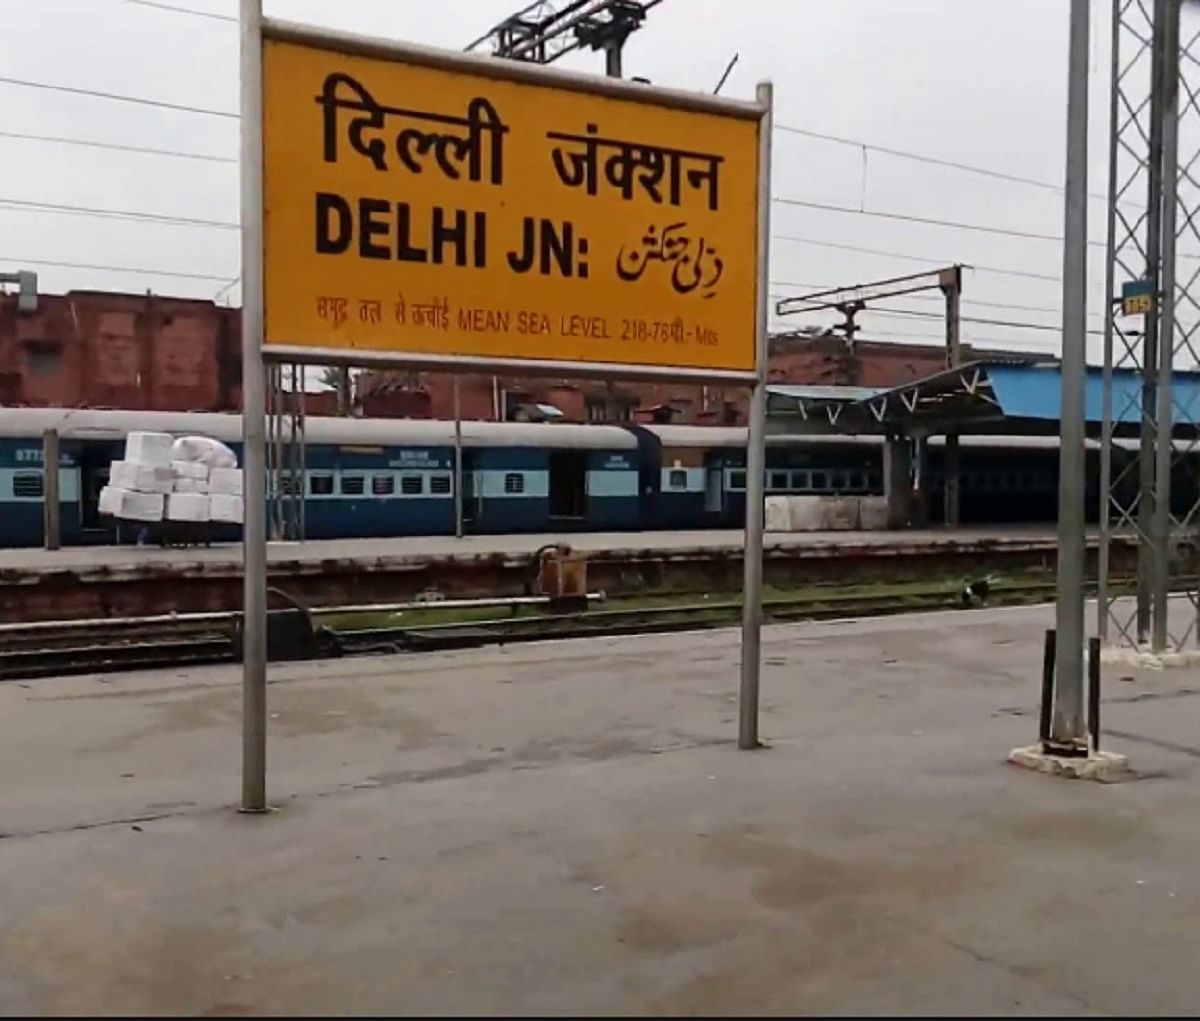 Do you know why sea level written on every railway station board